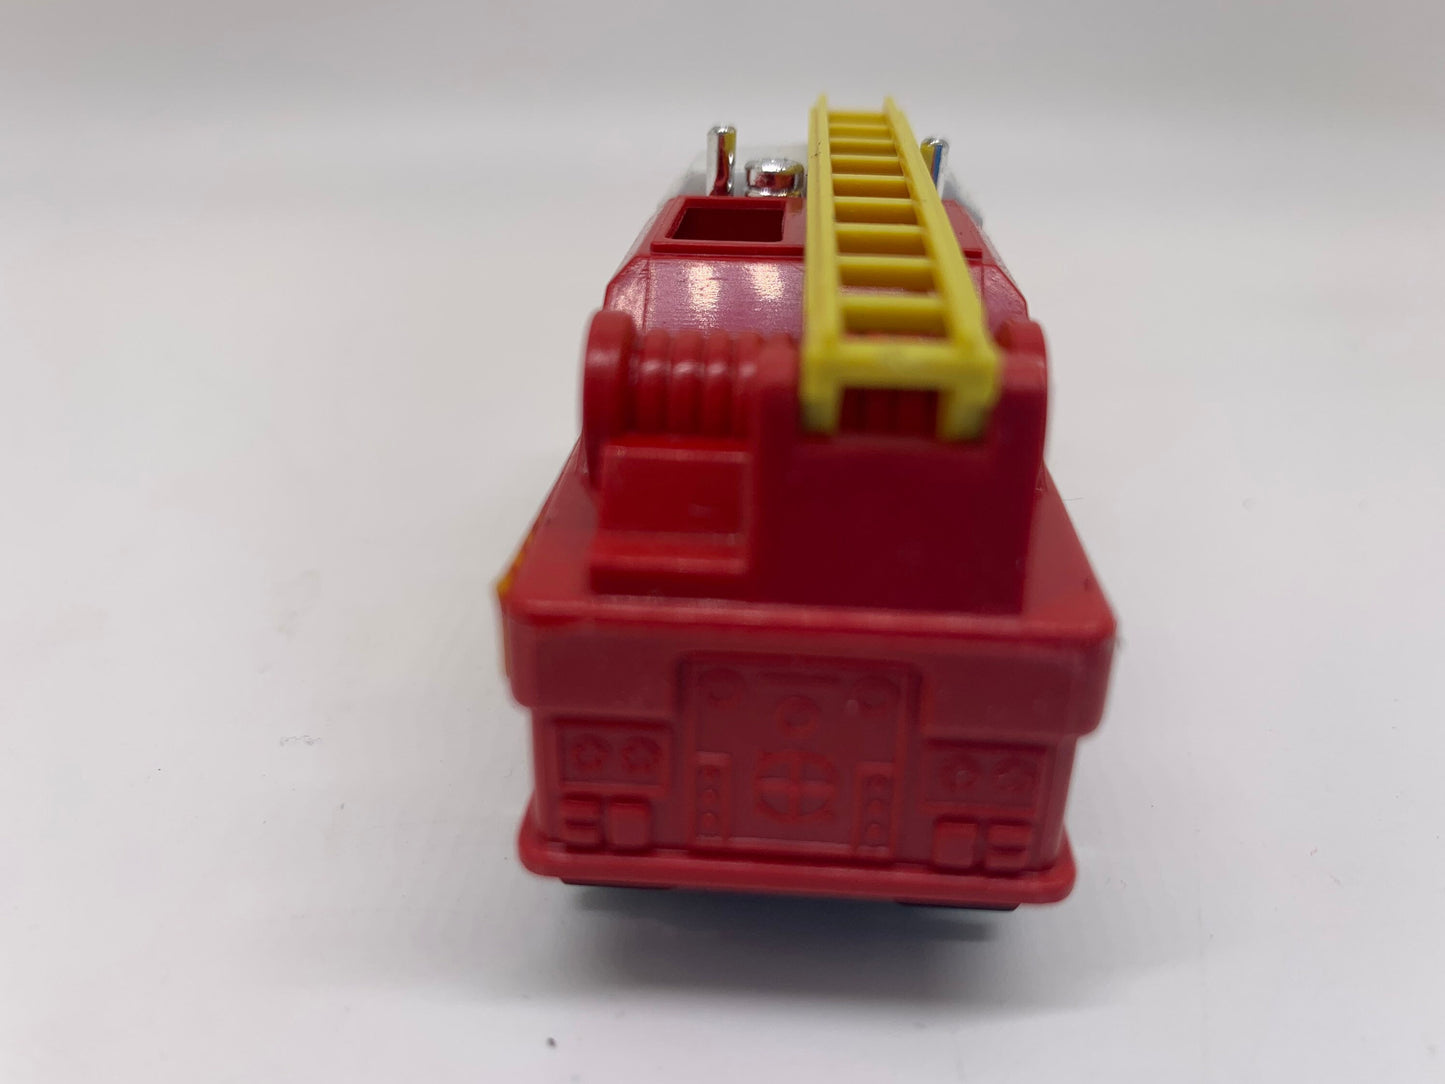 Guisval Bomberos Unidad 5 Fire Truck Red Miniature Collectible Scale Model Toy Car